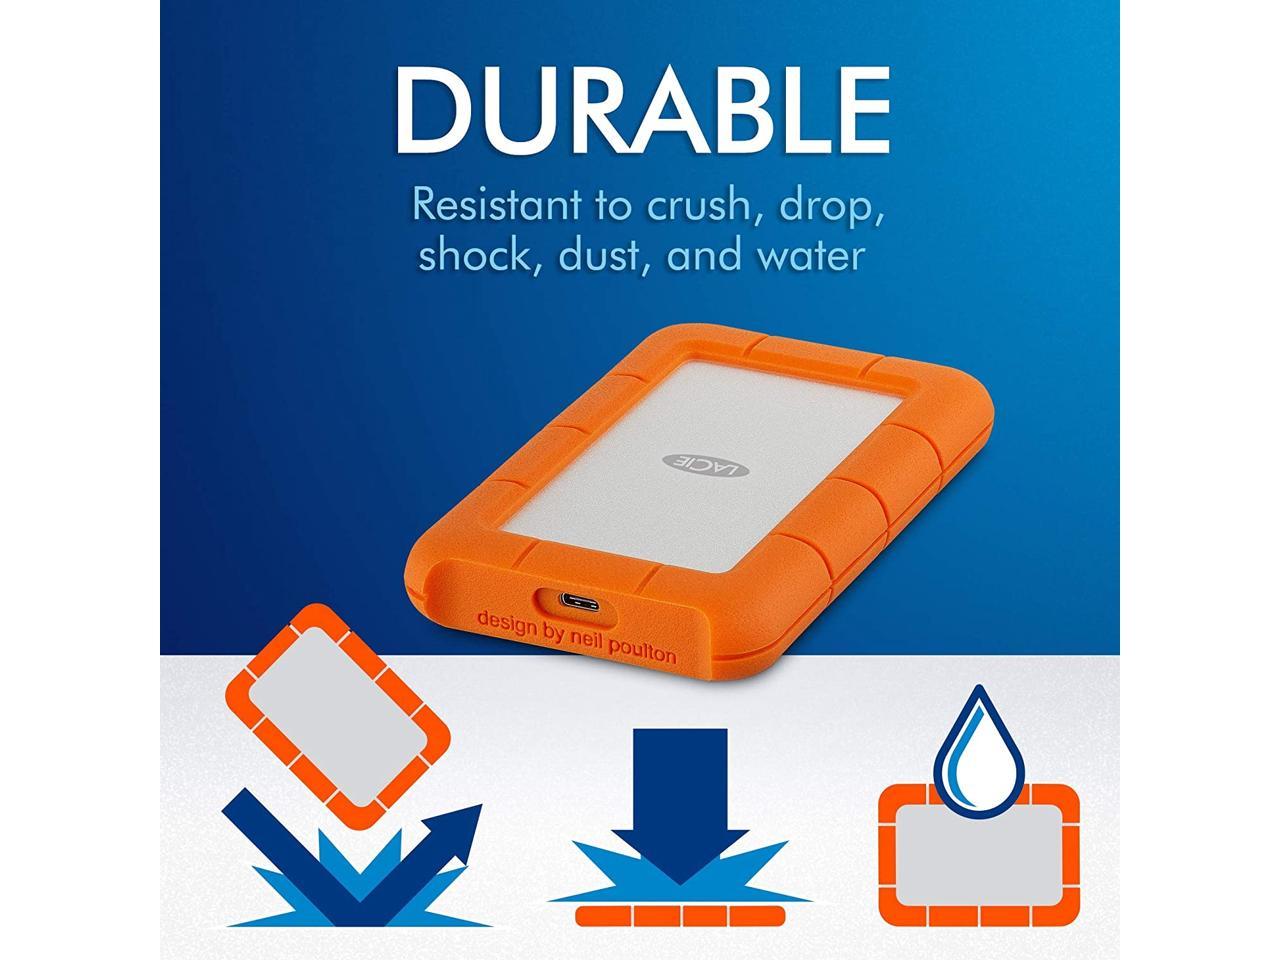 LaCie Rugged USB-C 1TB External Hard Drive Portable HDD USB 3.0 – Drop Shock Dust Rain Resistant Shuttle Drive, for Mac and PC Computer Desktop Workstation Laptop, 1 Month Adobe CC (STFR1000800)